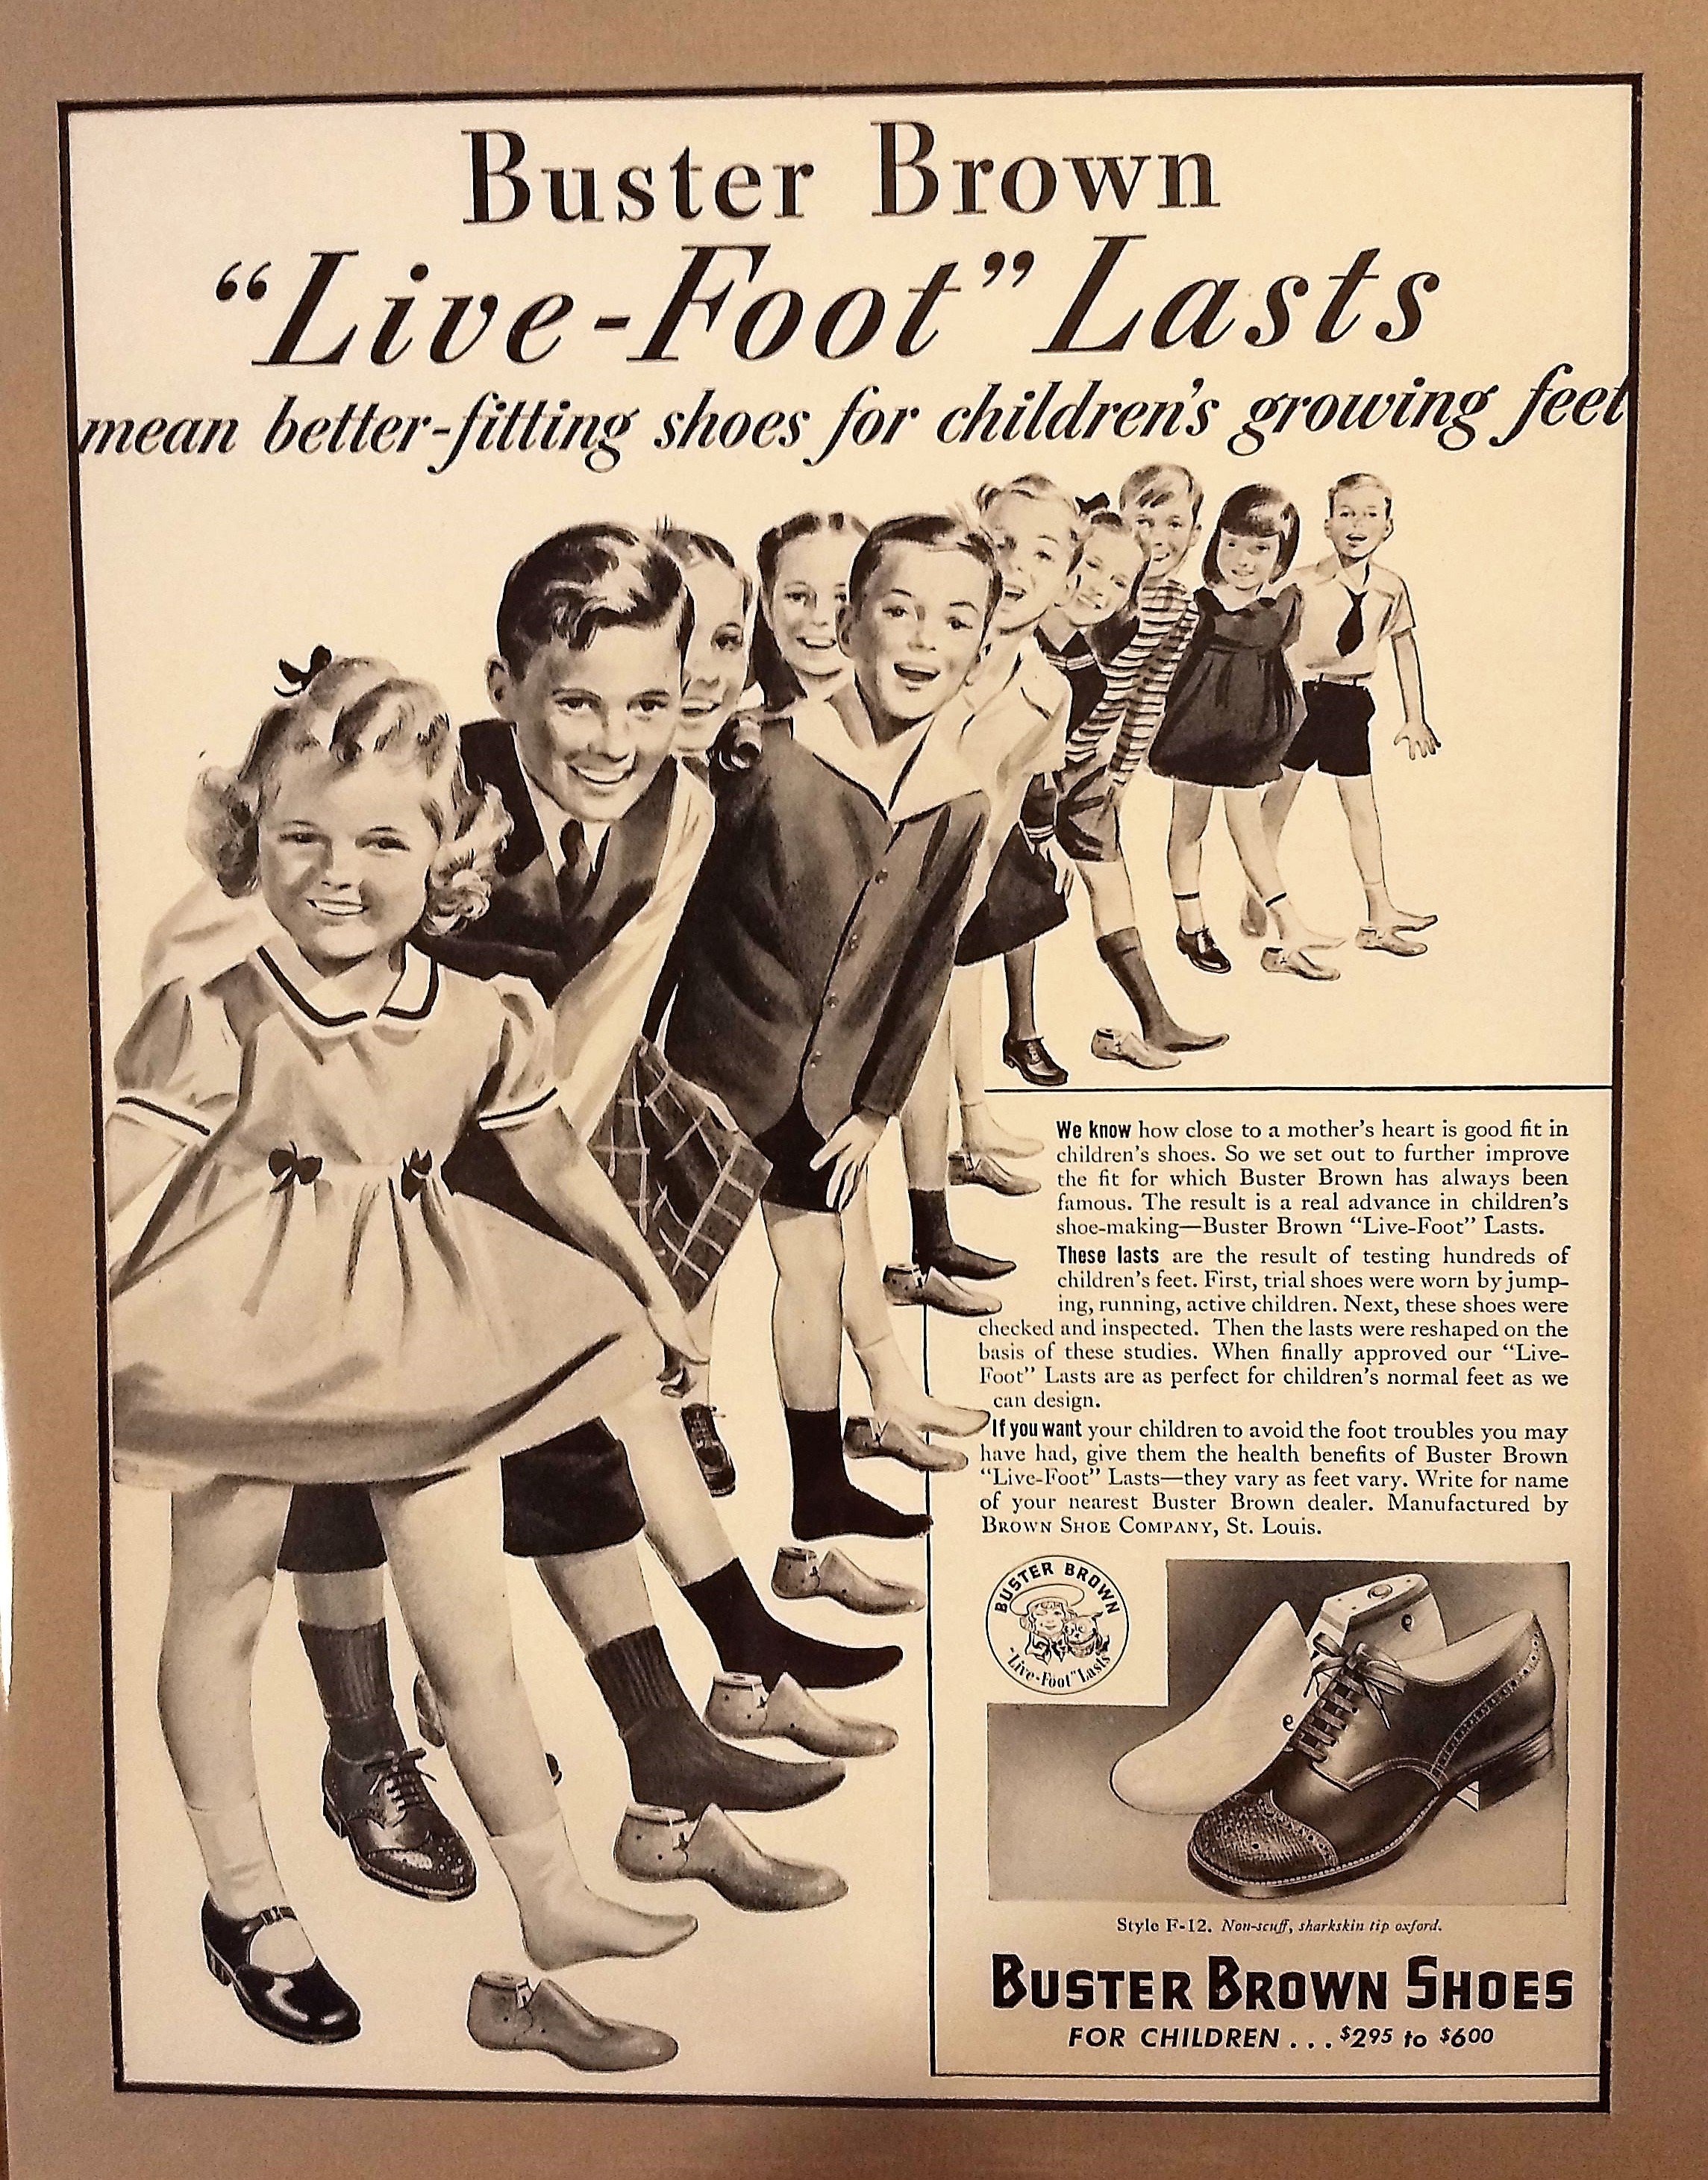 Buy 1942 Buster Brown Shoe Ad Matted Vintage 11x14 Print Online in India  Etsy